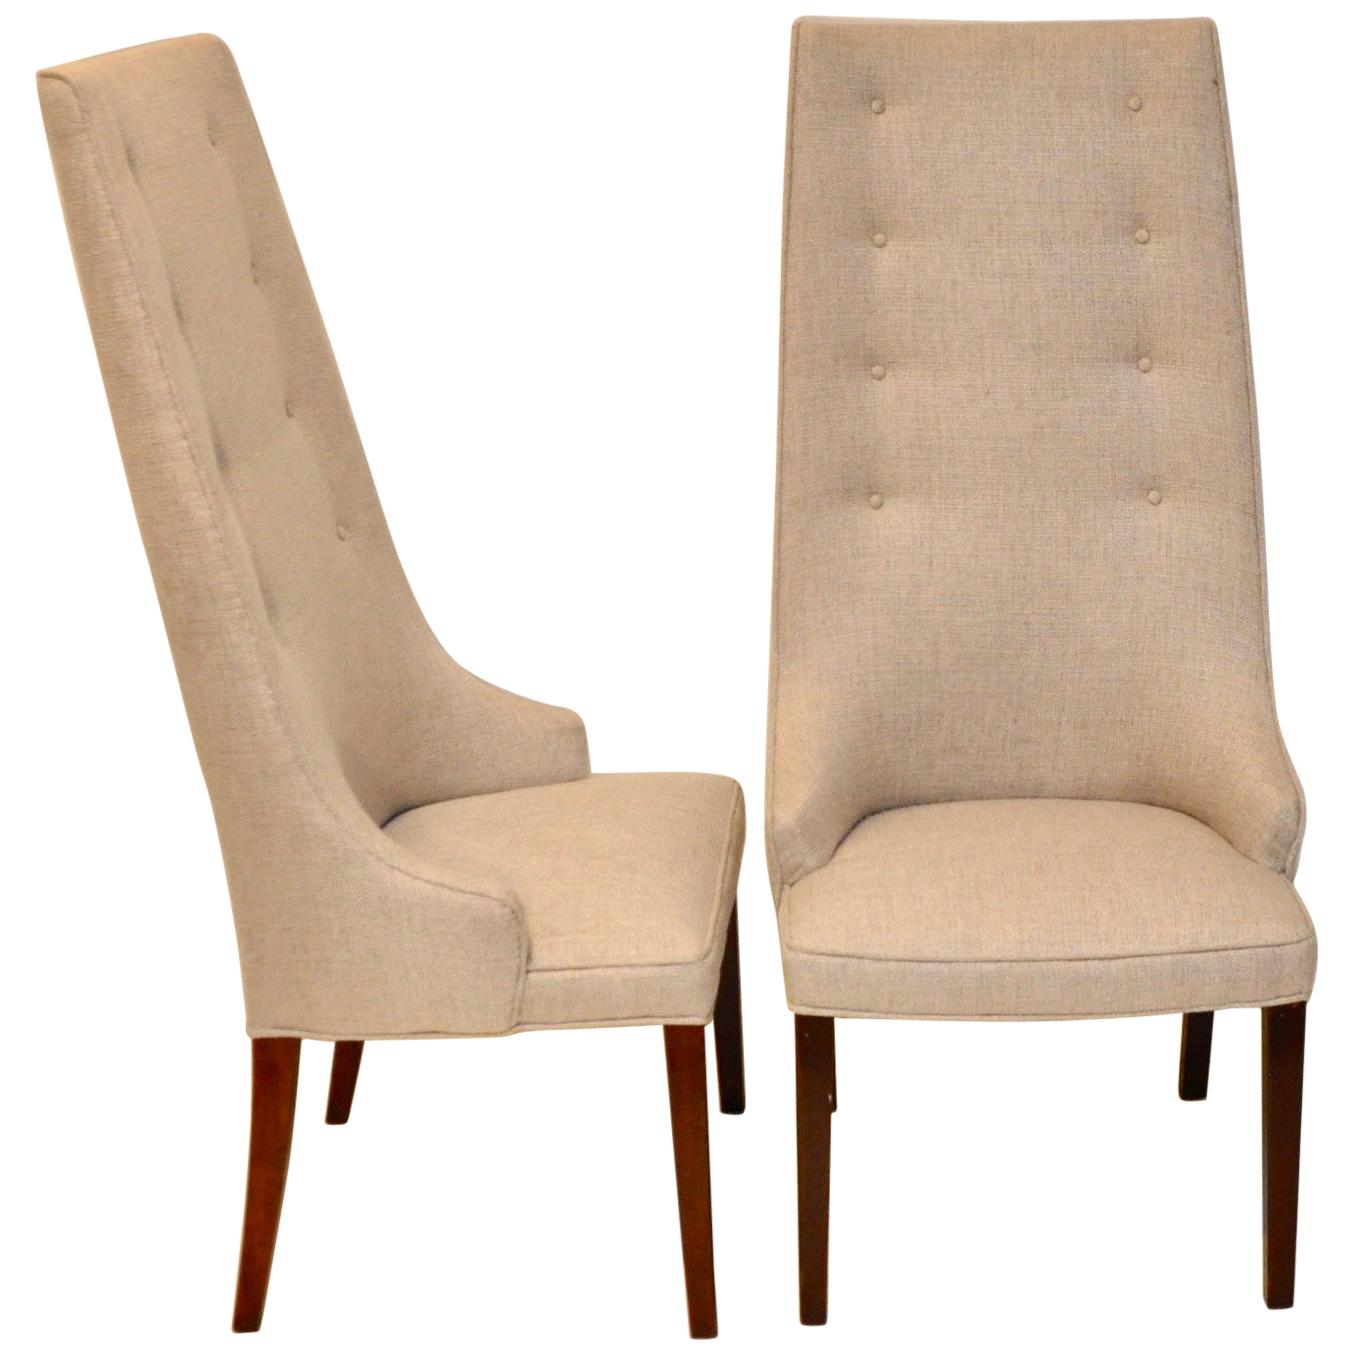 Pair of Midcentury Tall Back Dining Chairs from Denmark